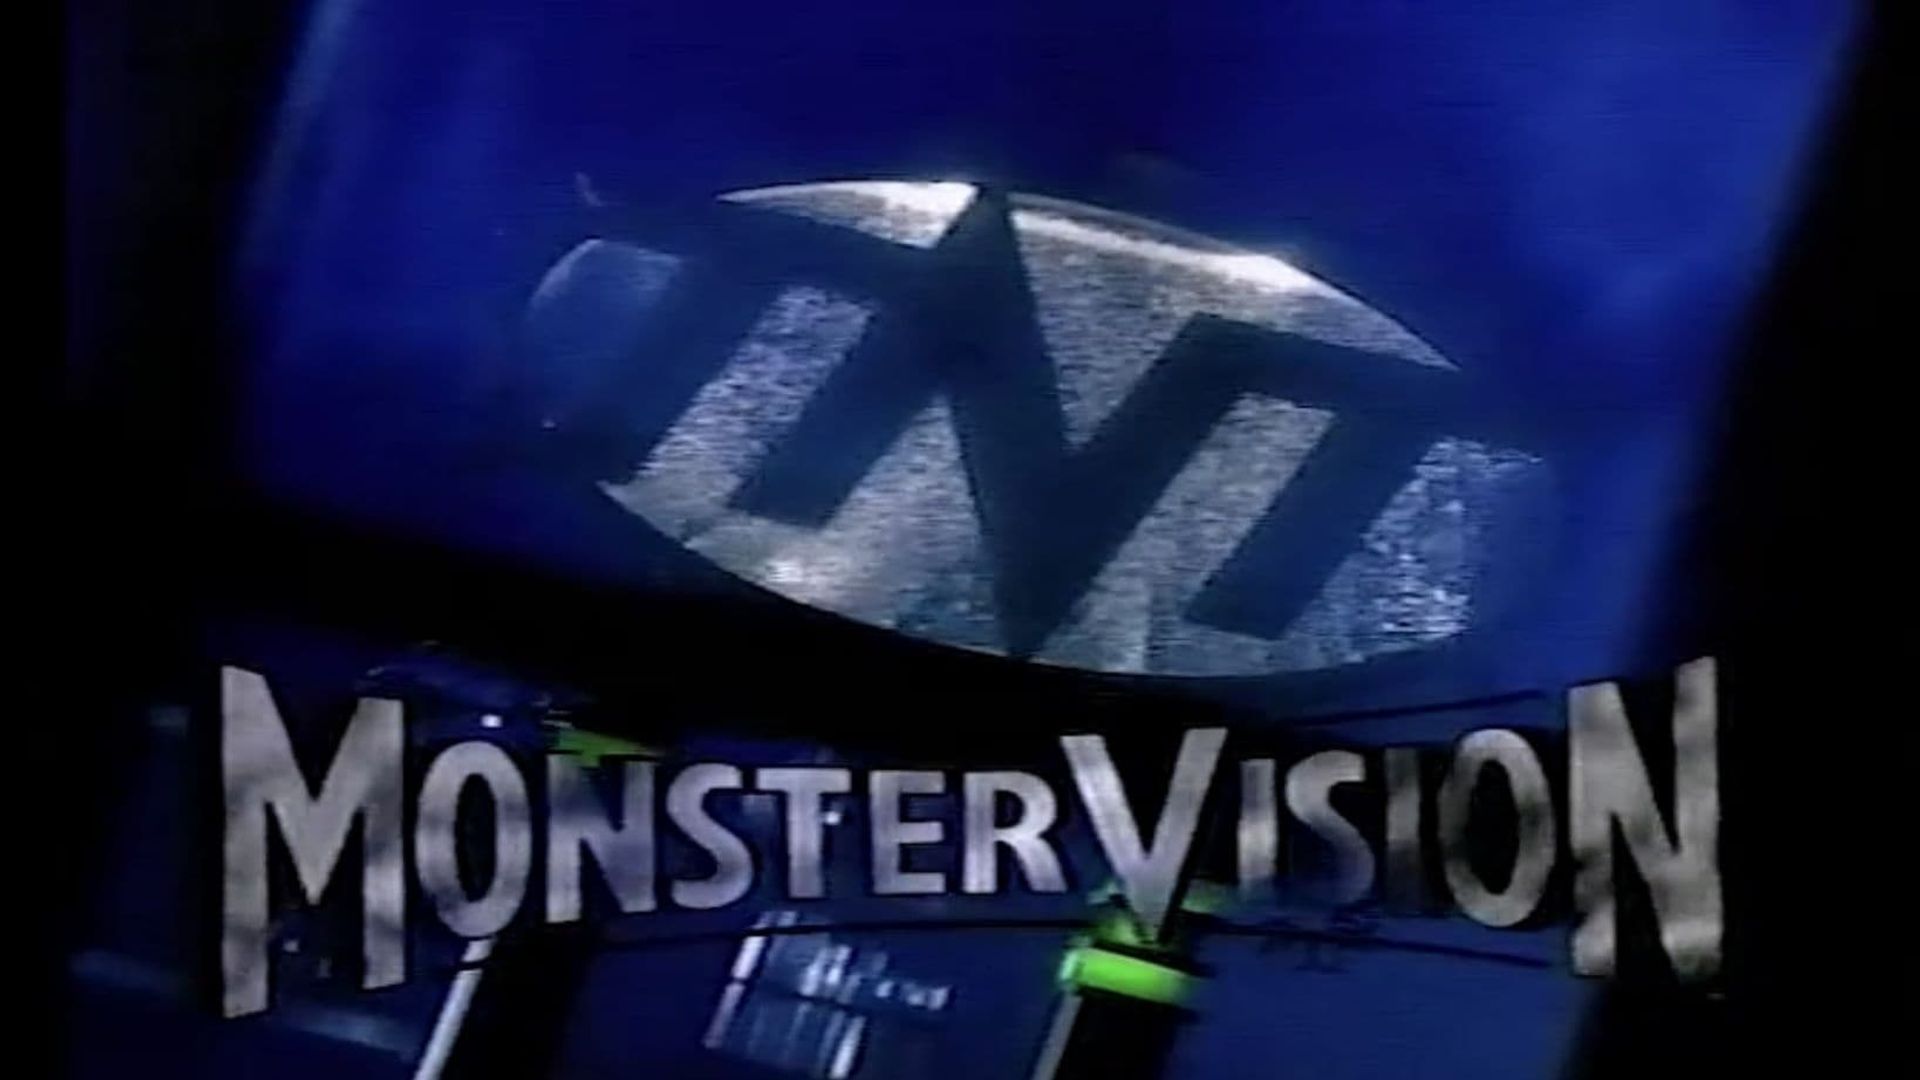 Monstervision background